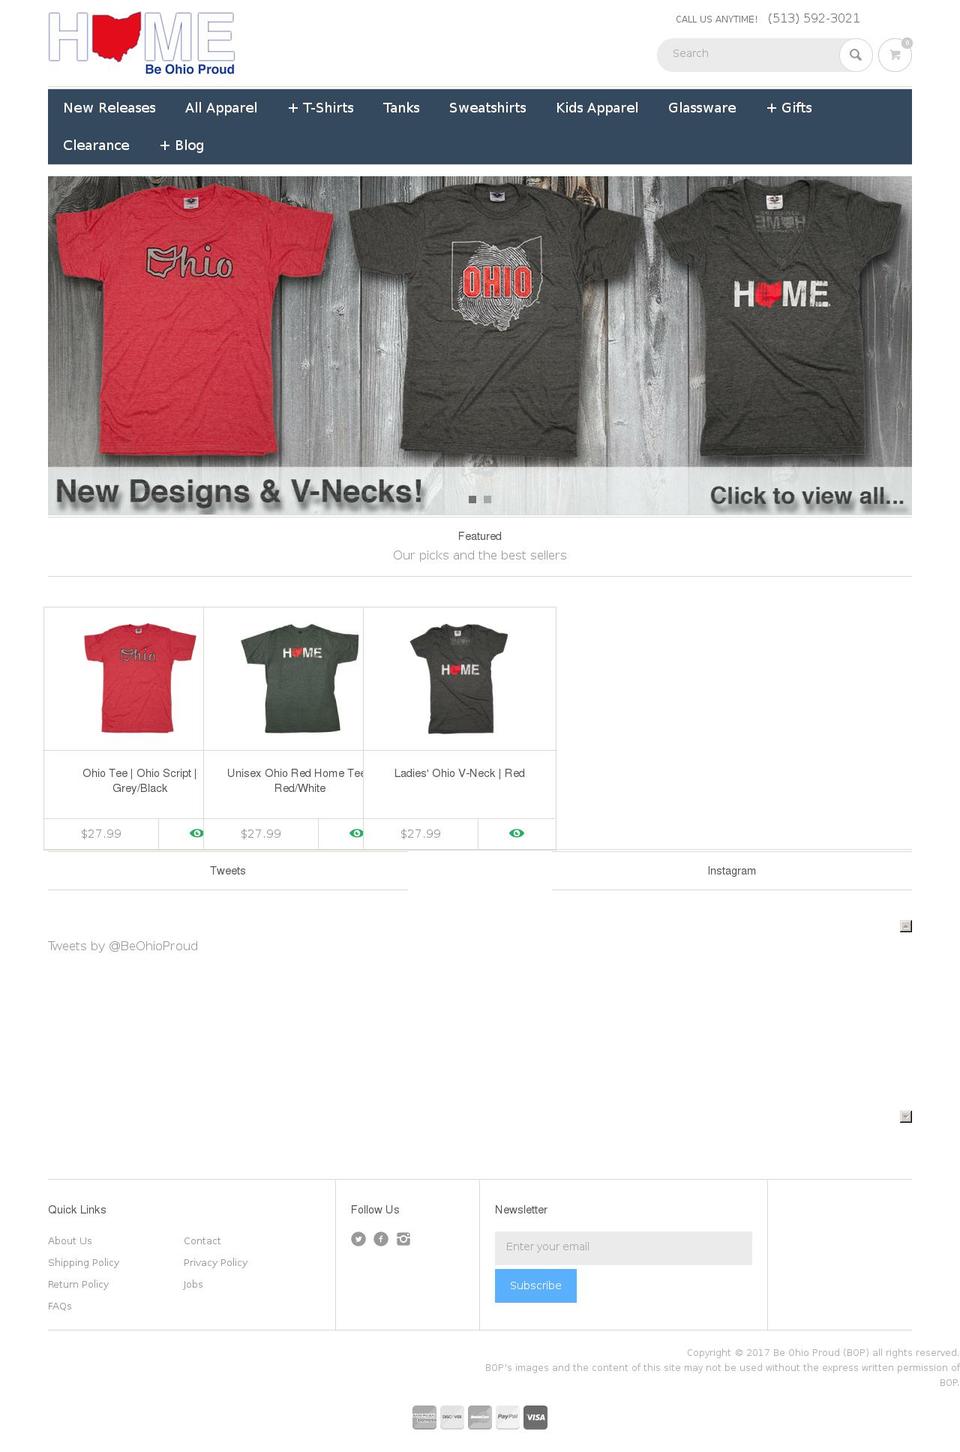 Refresh Shopify theme site example beohioproud.com